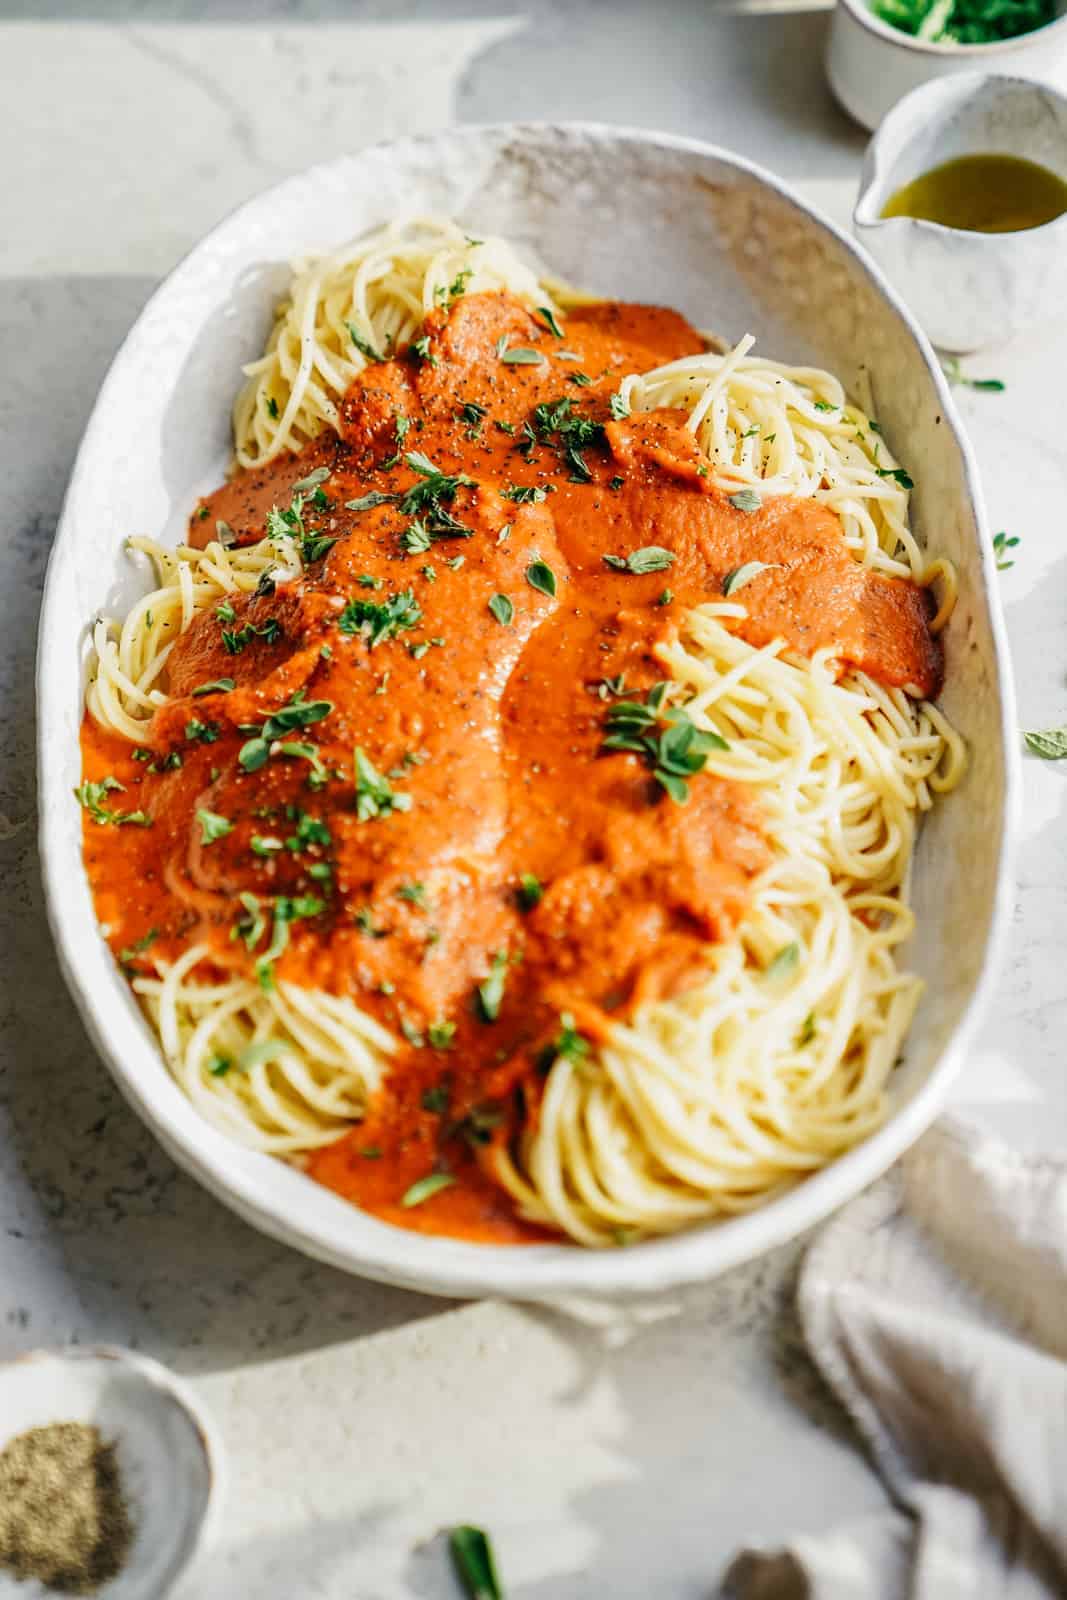 grandma's ultimate plant-based pasta sauce served on spaghetti in a serving dish ready to eat.